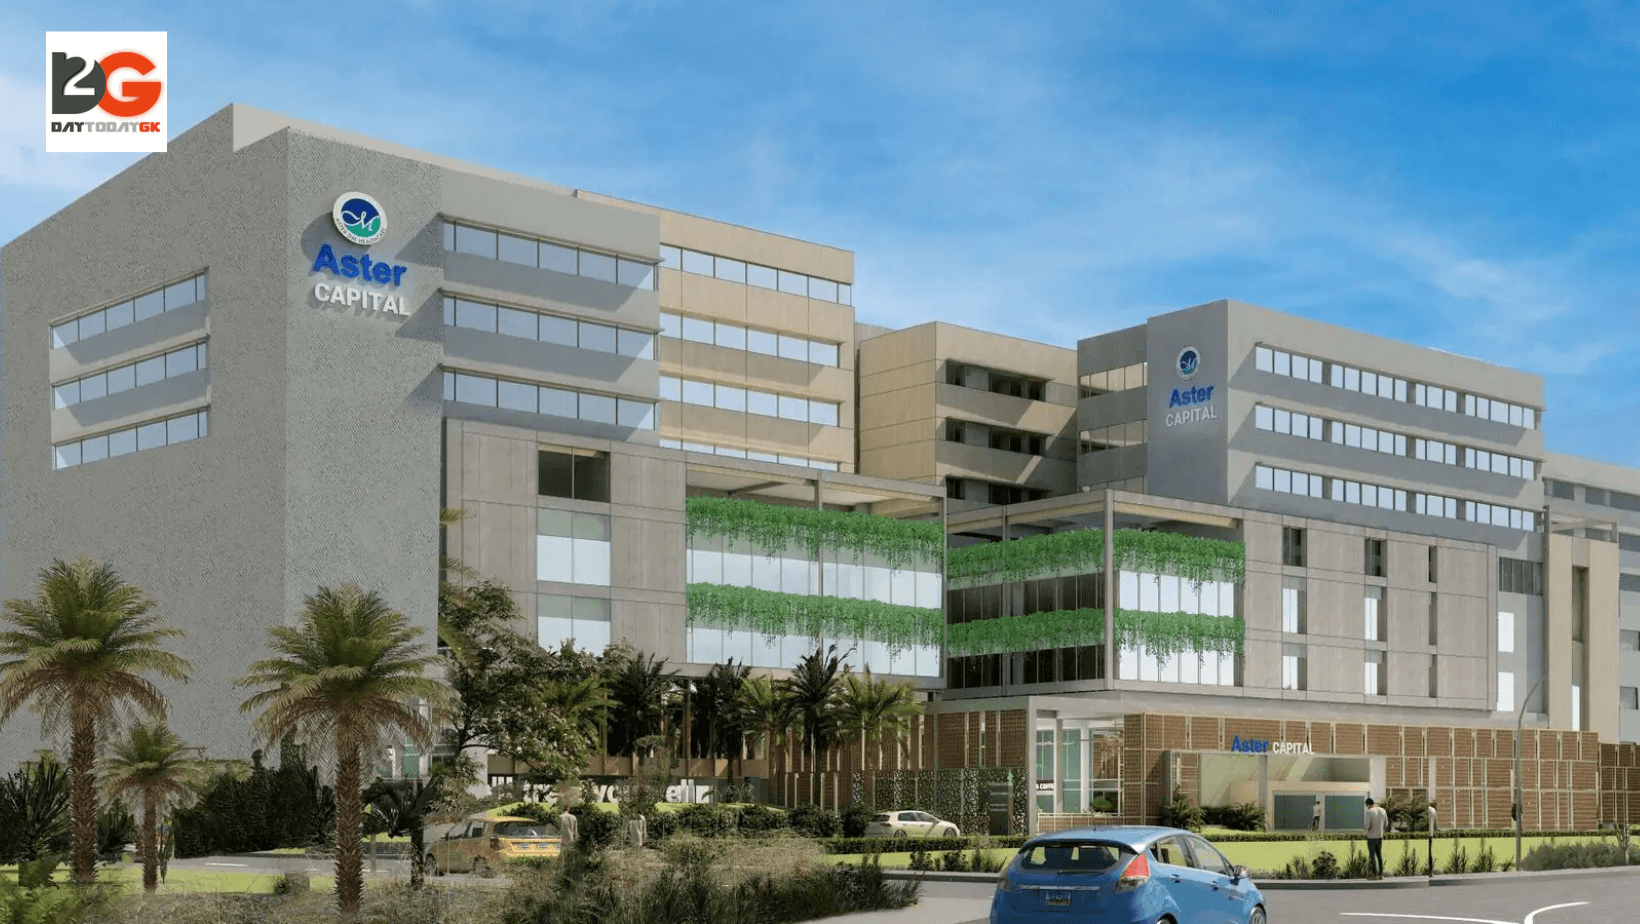 Claiming to Be India’s Top Emerging Hospital, Aster Medcity